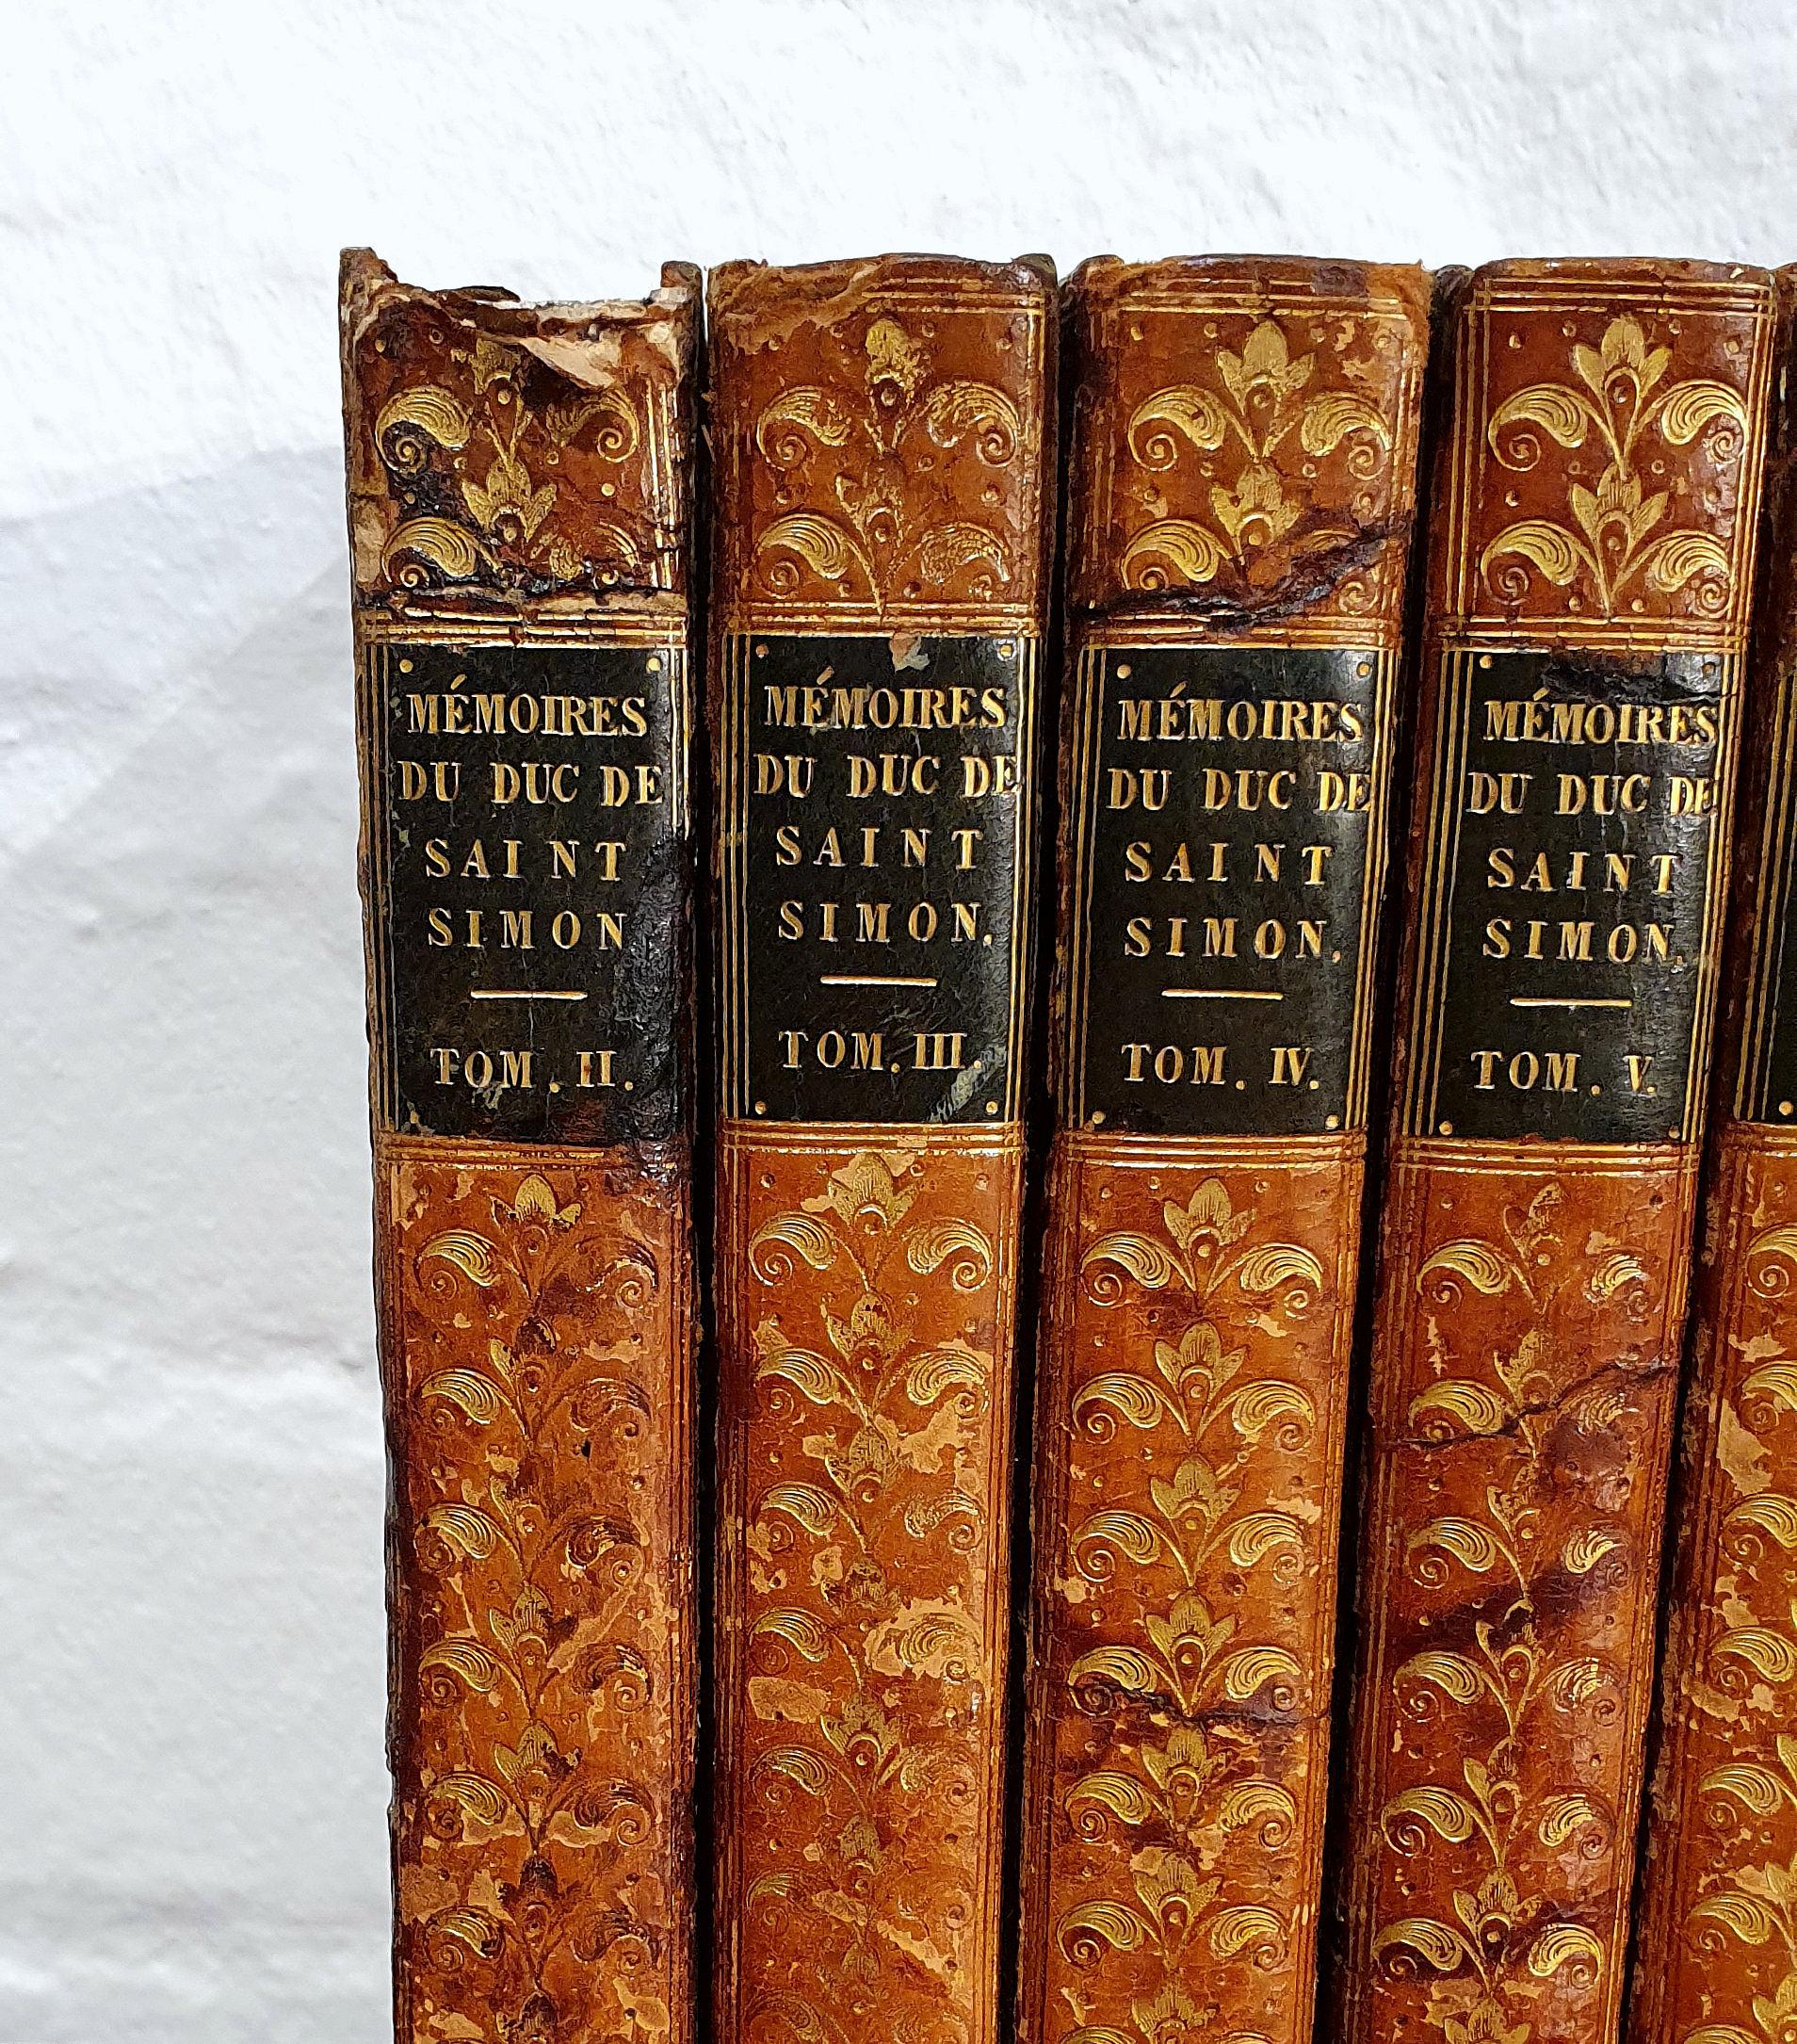 These beautifully leather bound French books are a set of 13, all of which date between 1829-1830. Each book is bound in a rich tone of tan, detailed with gold leaf embossing. The books do have some small amount of damage and water markings, but do